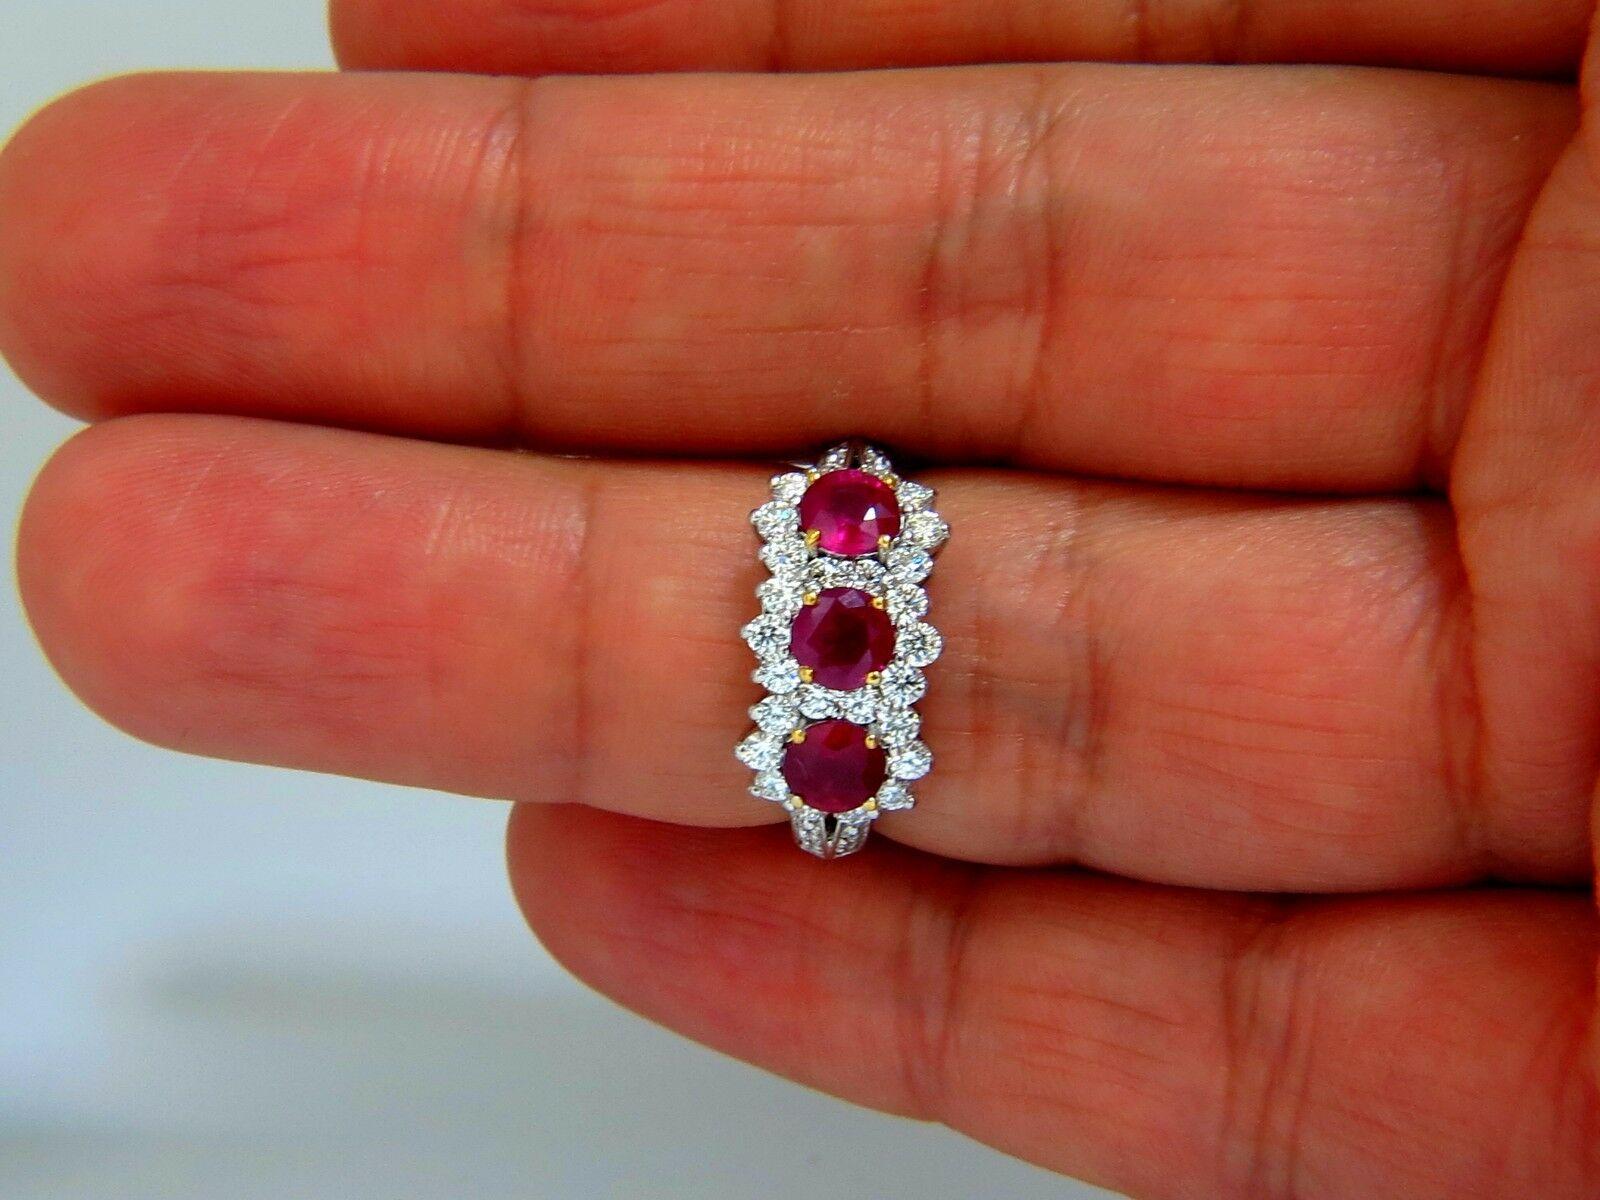 Round Cut 2.52ct natural vivid red ruby diamonds ring 14kt three stone halo class For Sale